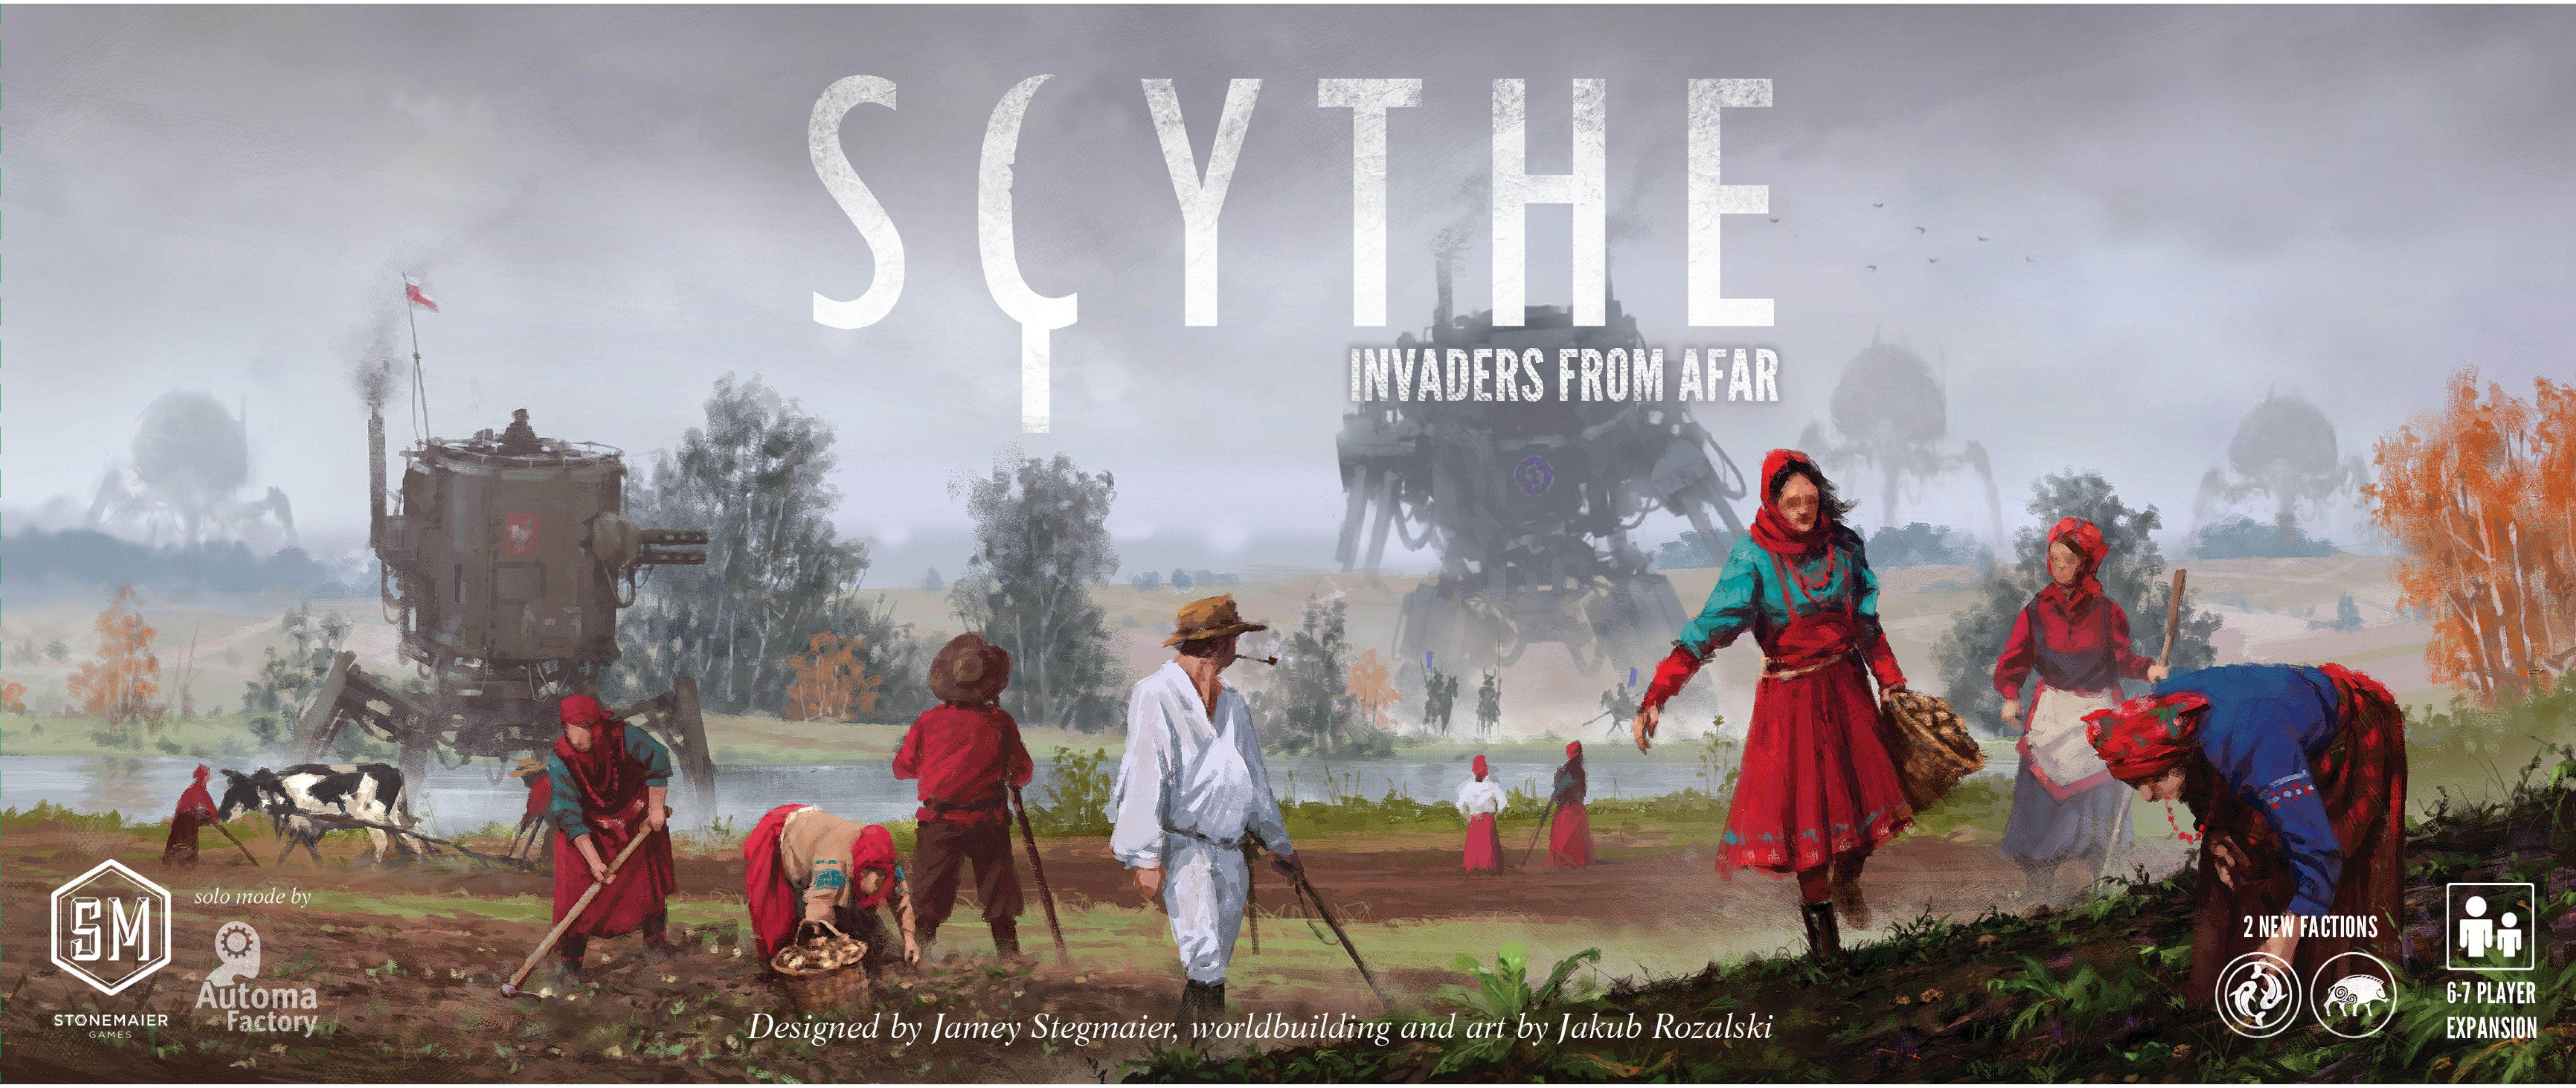 Scythe: Invaders from Afar Retail Edition Board Game Expansion